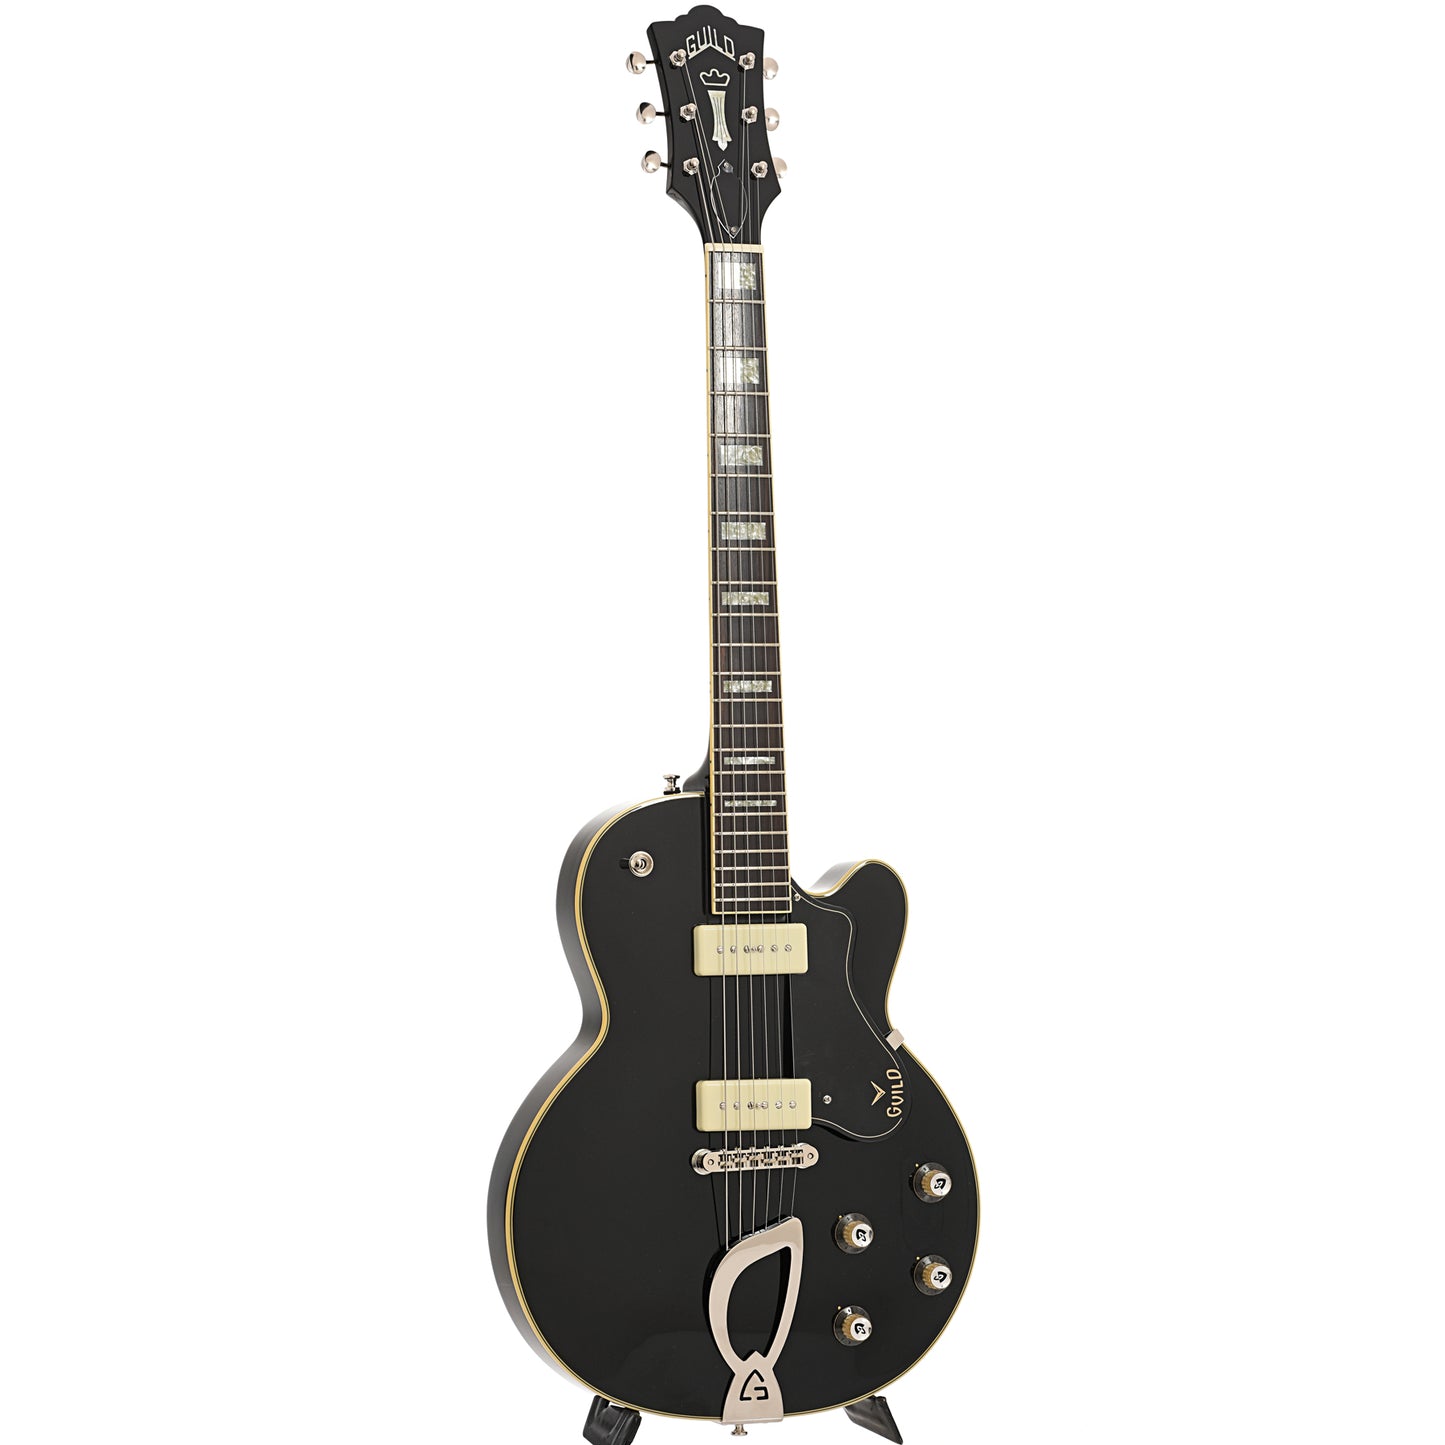 Full front and side of Guild Newark St. Collection M-75 Aristocrat Hollow Body Archtop Guitar, Limited Edition Black Finish